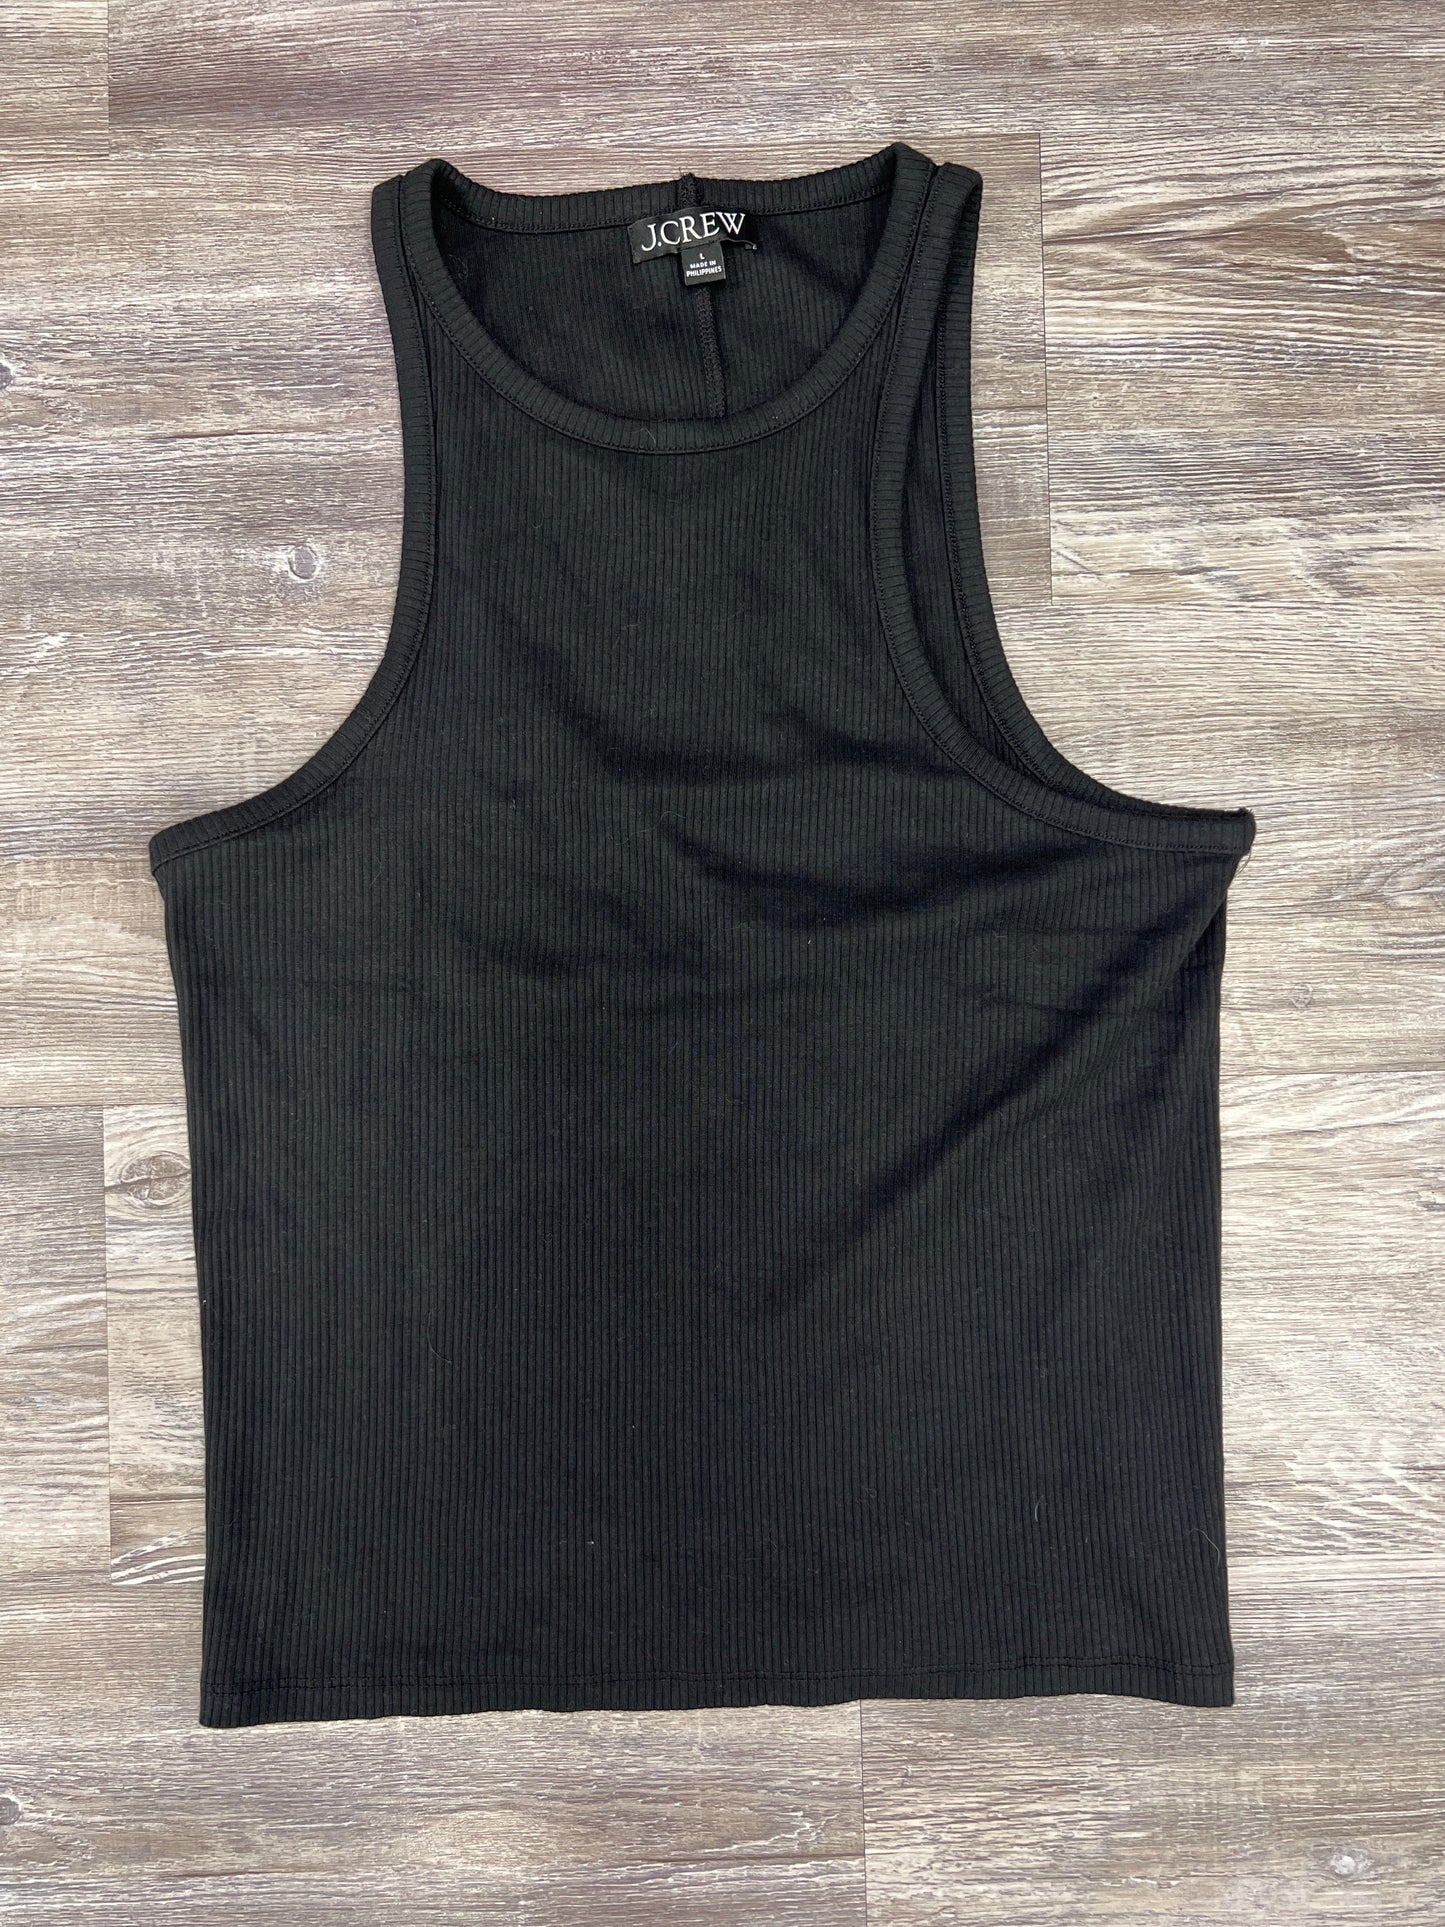 Top Sleeveless Basic By J. Crew Size: L